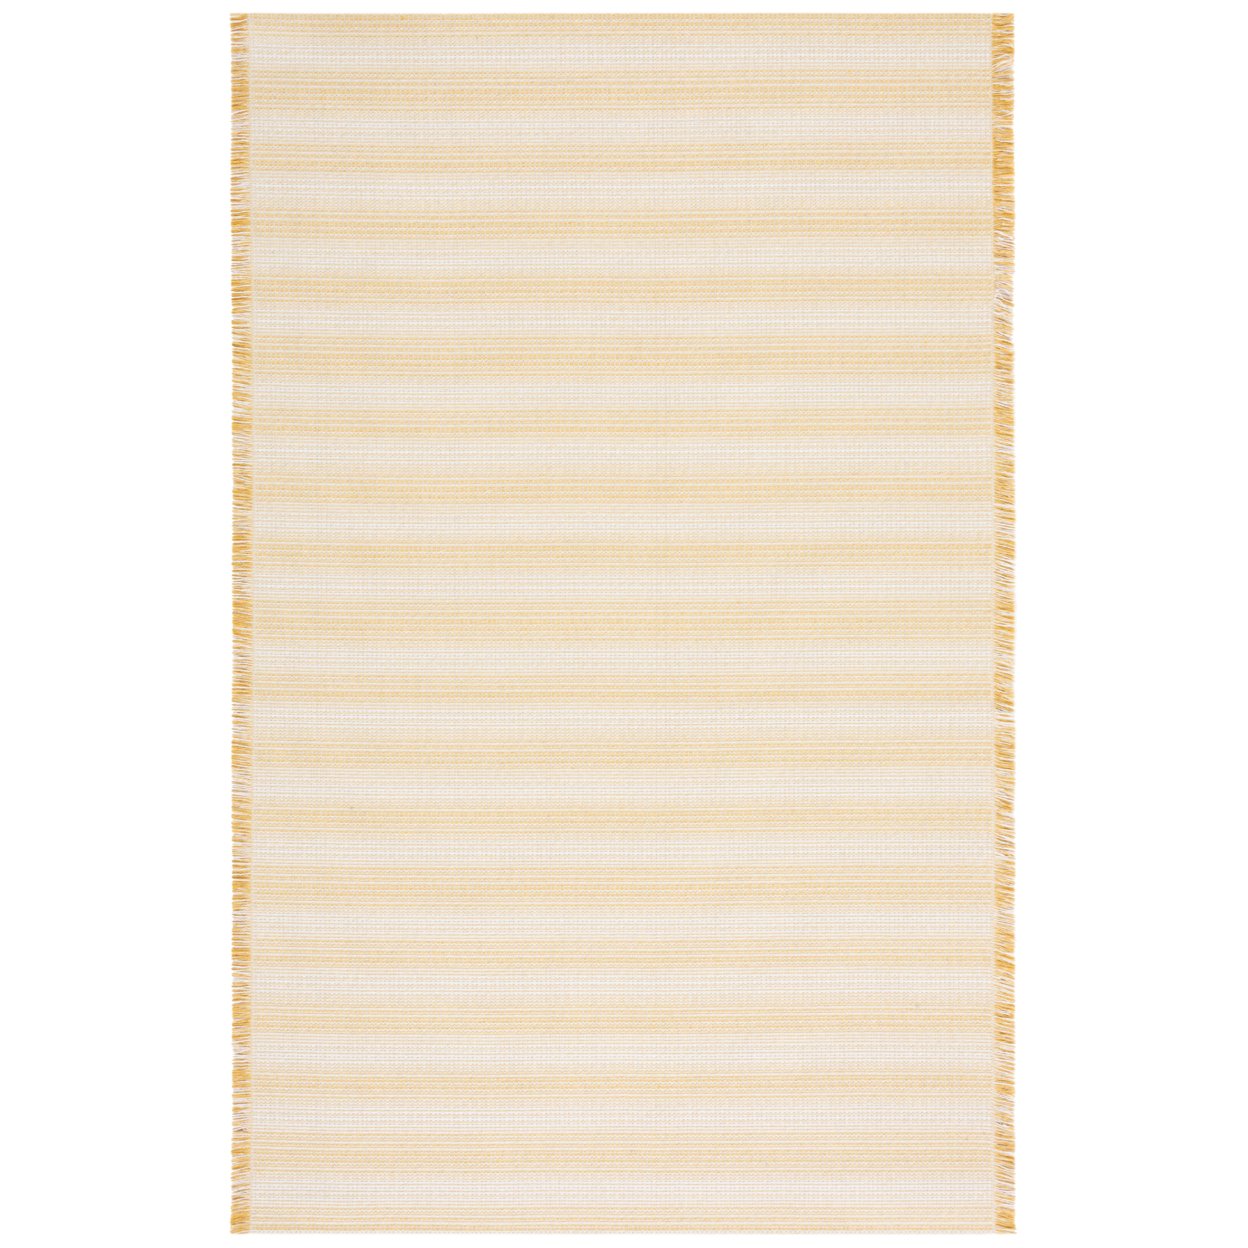 Safavieh AGT501C Augustine 500 Ivory / Yellow - Charcoal / Ivory, 8' X 10' Rectangle